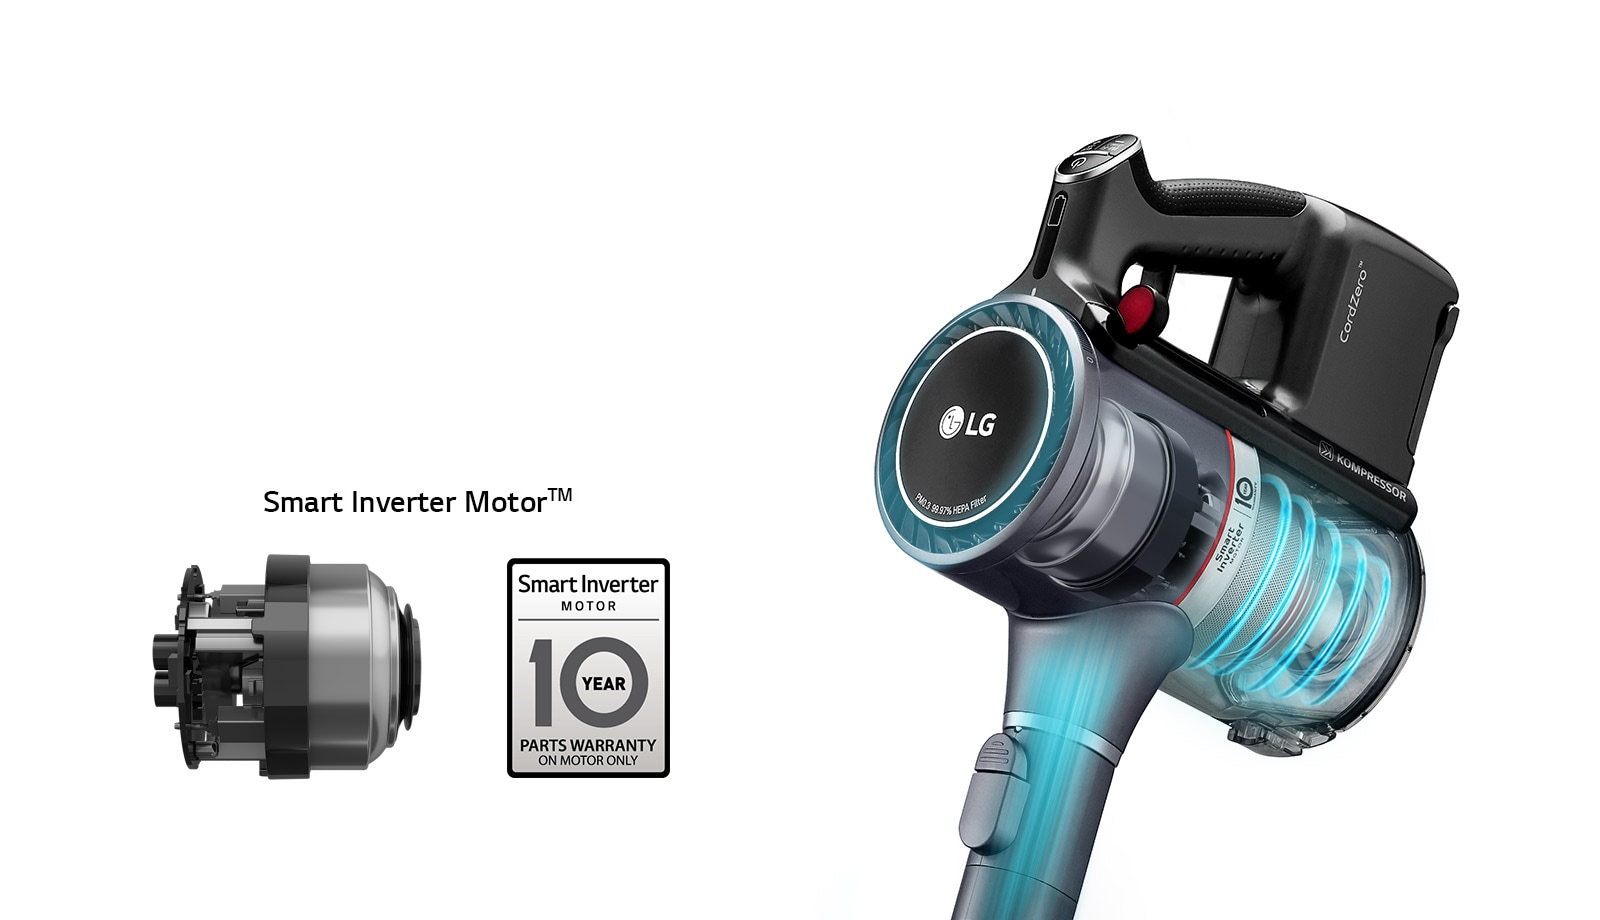 The handle area of the handstick vacuum cleaner is shown on the left with the Smart Inverter Motor™ which is inside shown on the right outside of the machine.